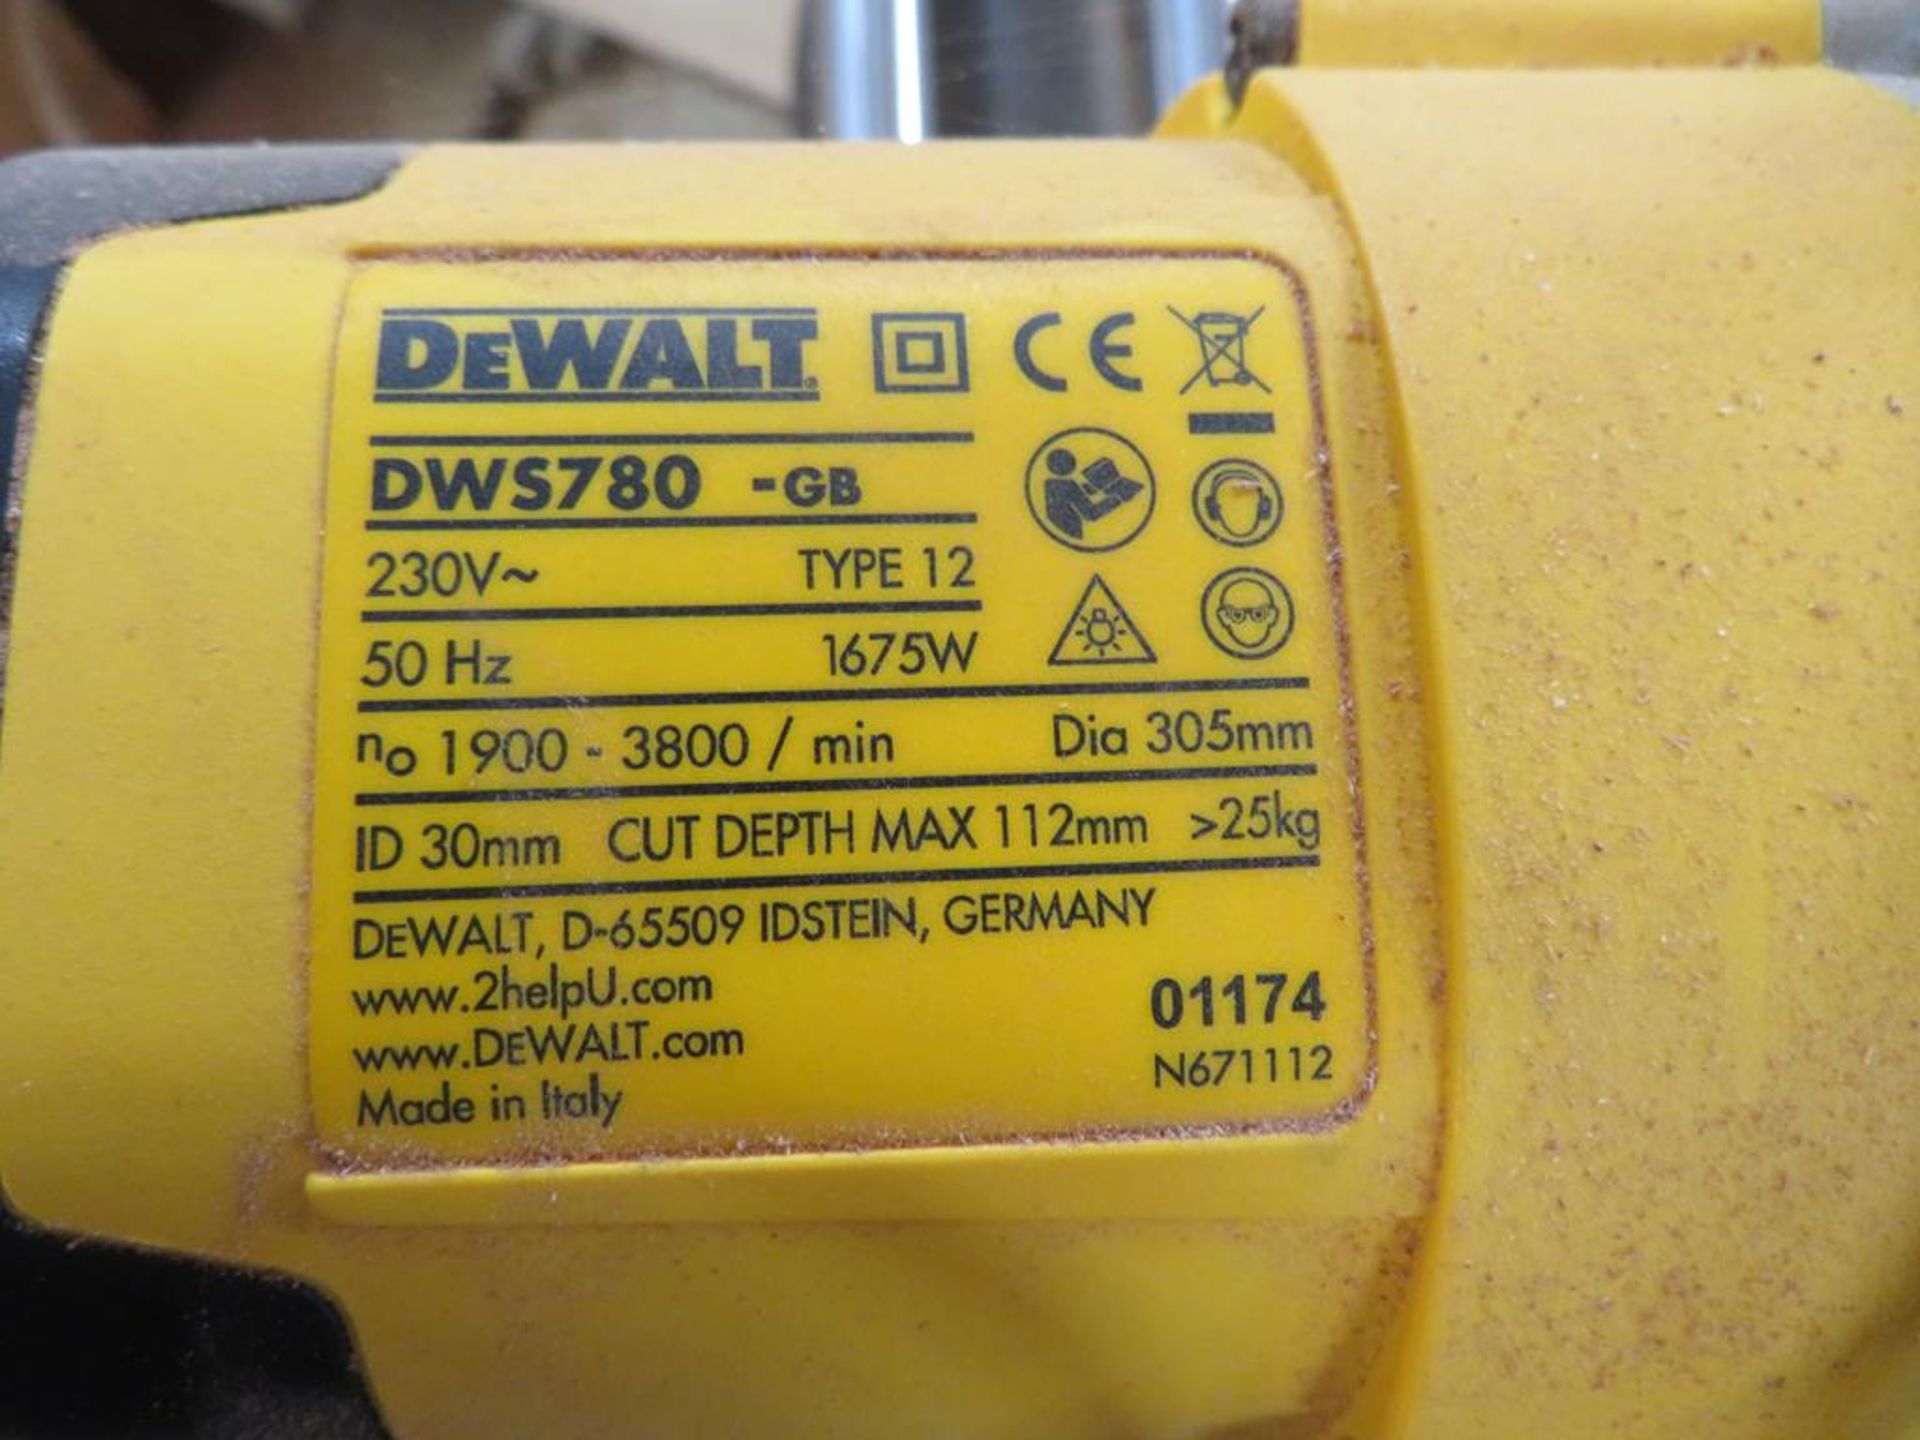 DeWalt DWS780-GB Cross Cut Saw with Record Power RSDE2 Dust Extactor - Image 6 of 6